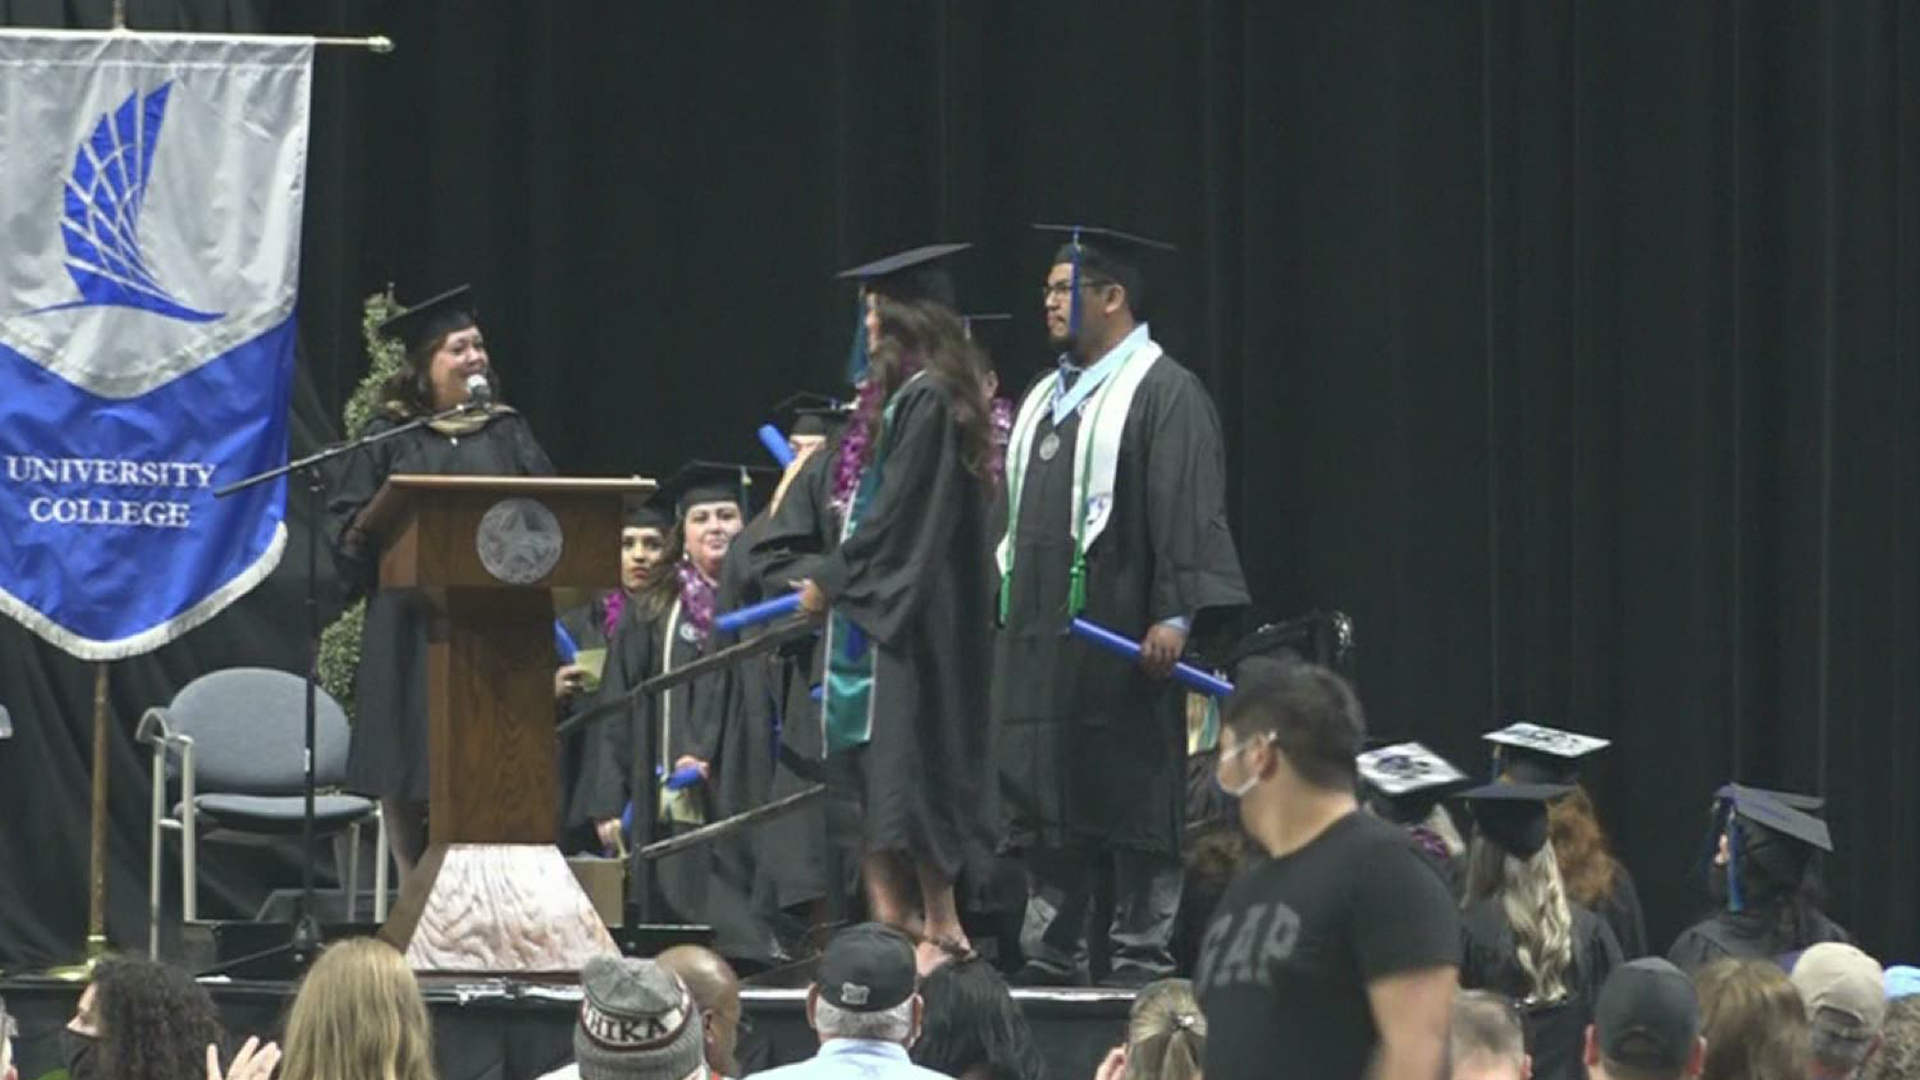 Students at the island university celebrated their achievements Saturday as they walked across the stage and received a diploma.